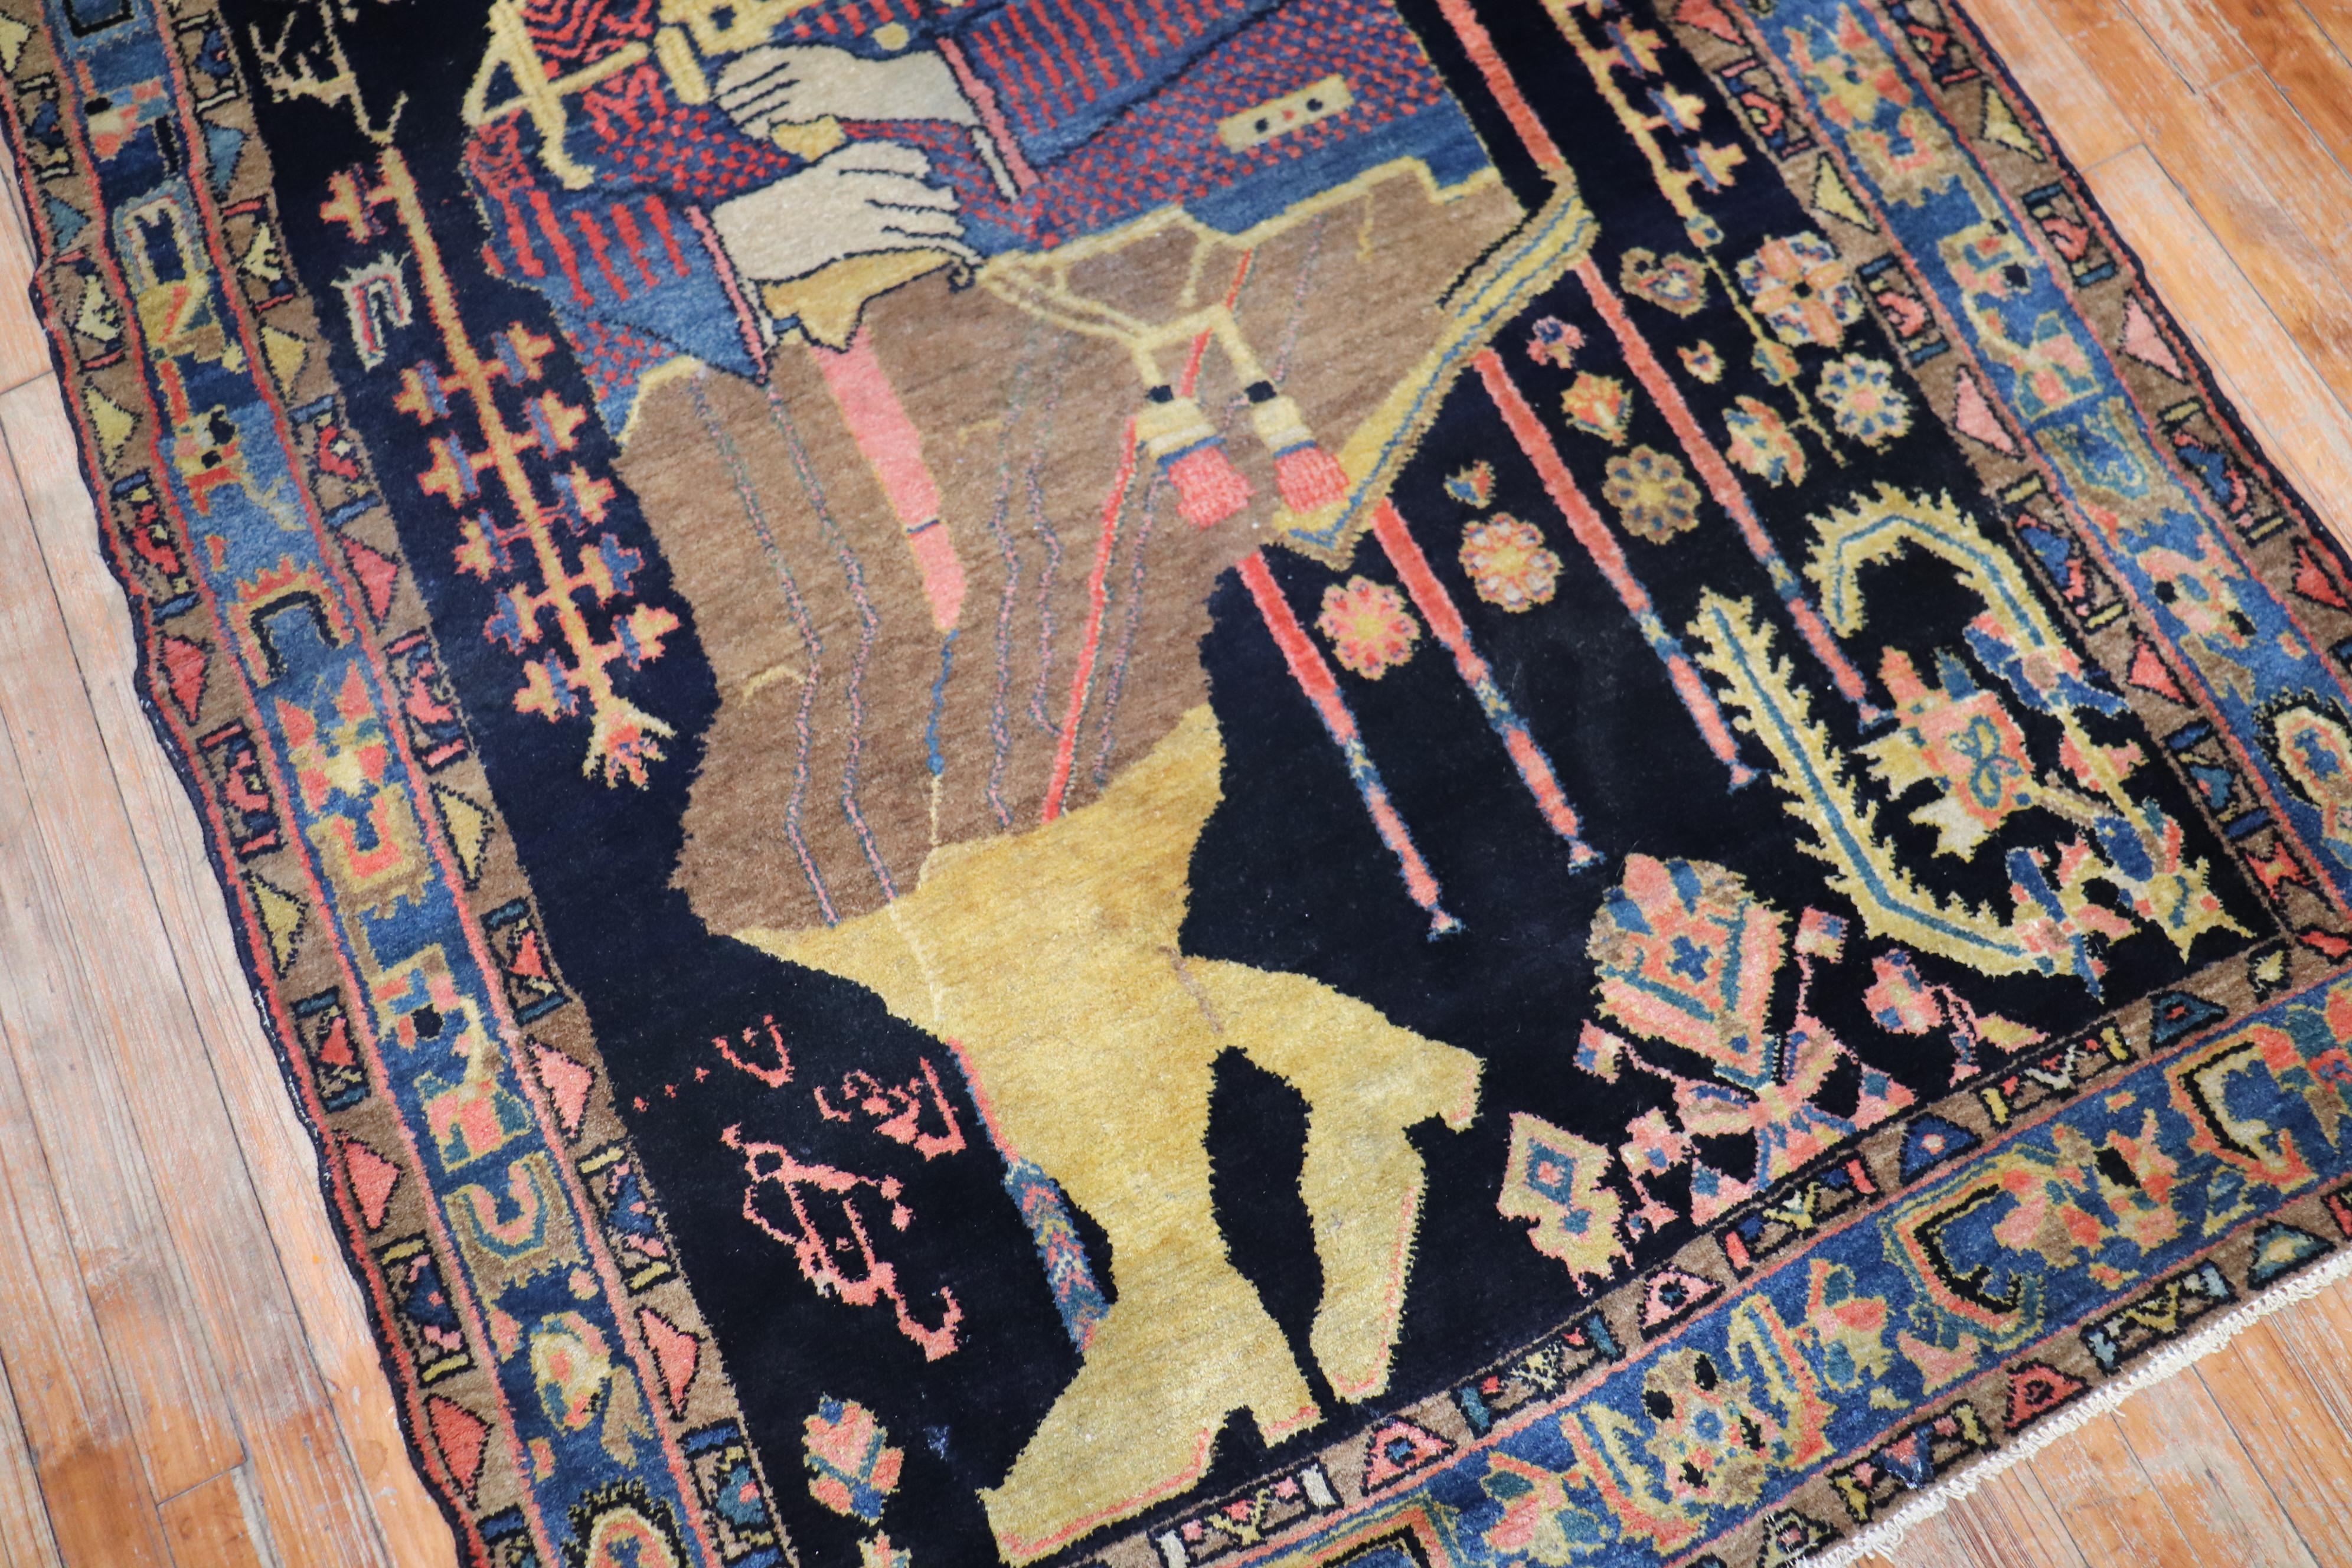 Hand-Woven Kurdish Colonel Mohammad Tagi-Khan Persian Pictorial Rug For Sale